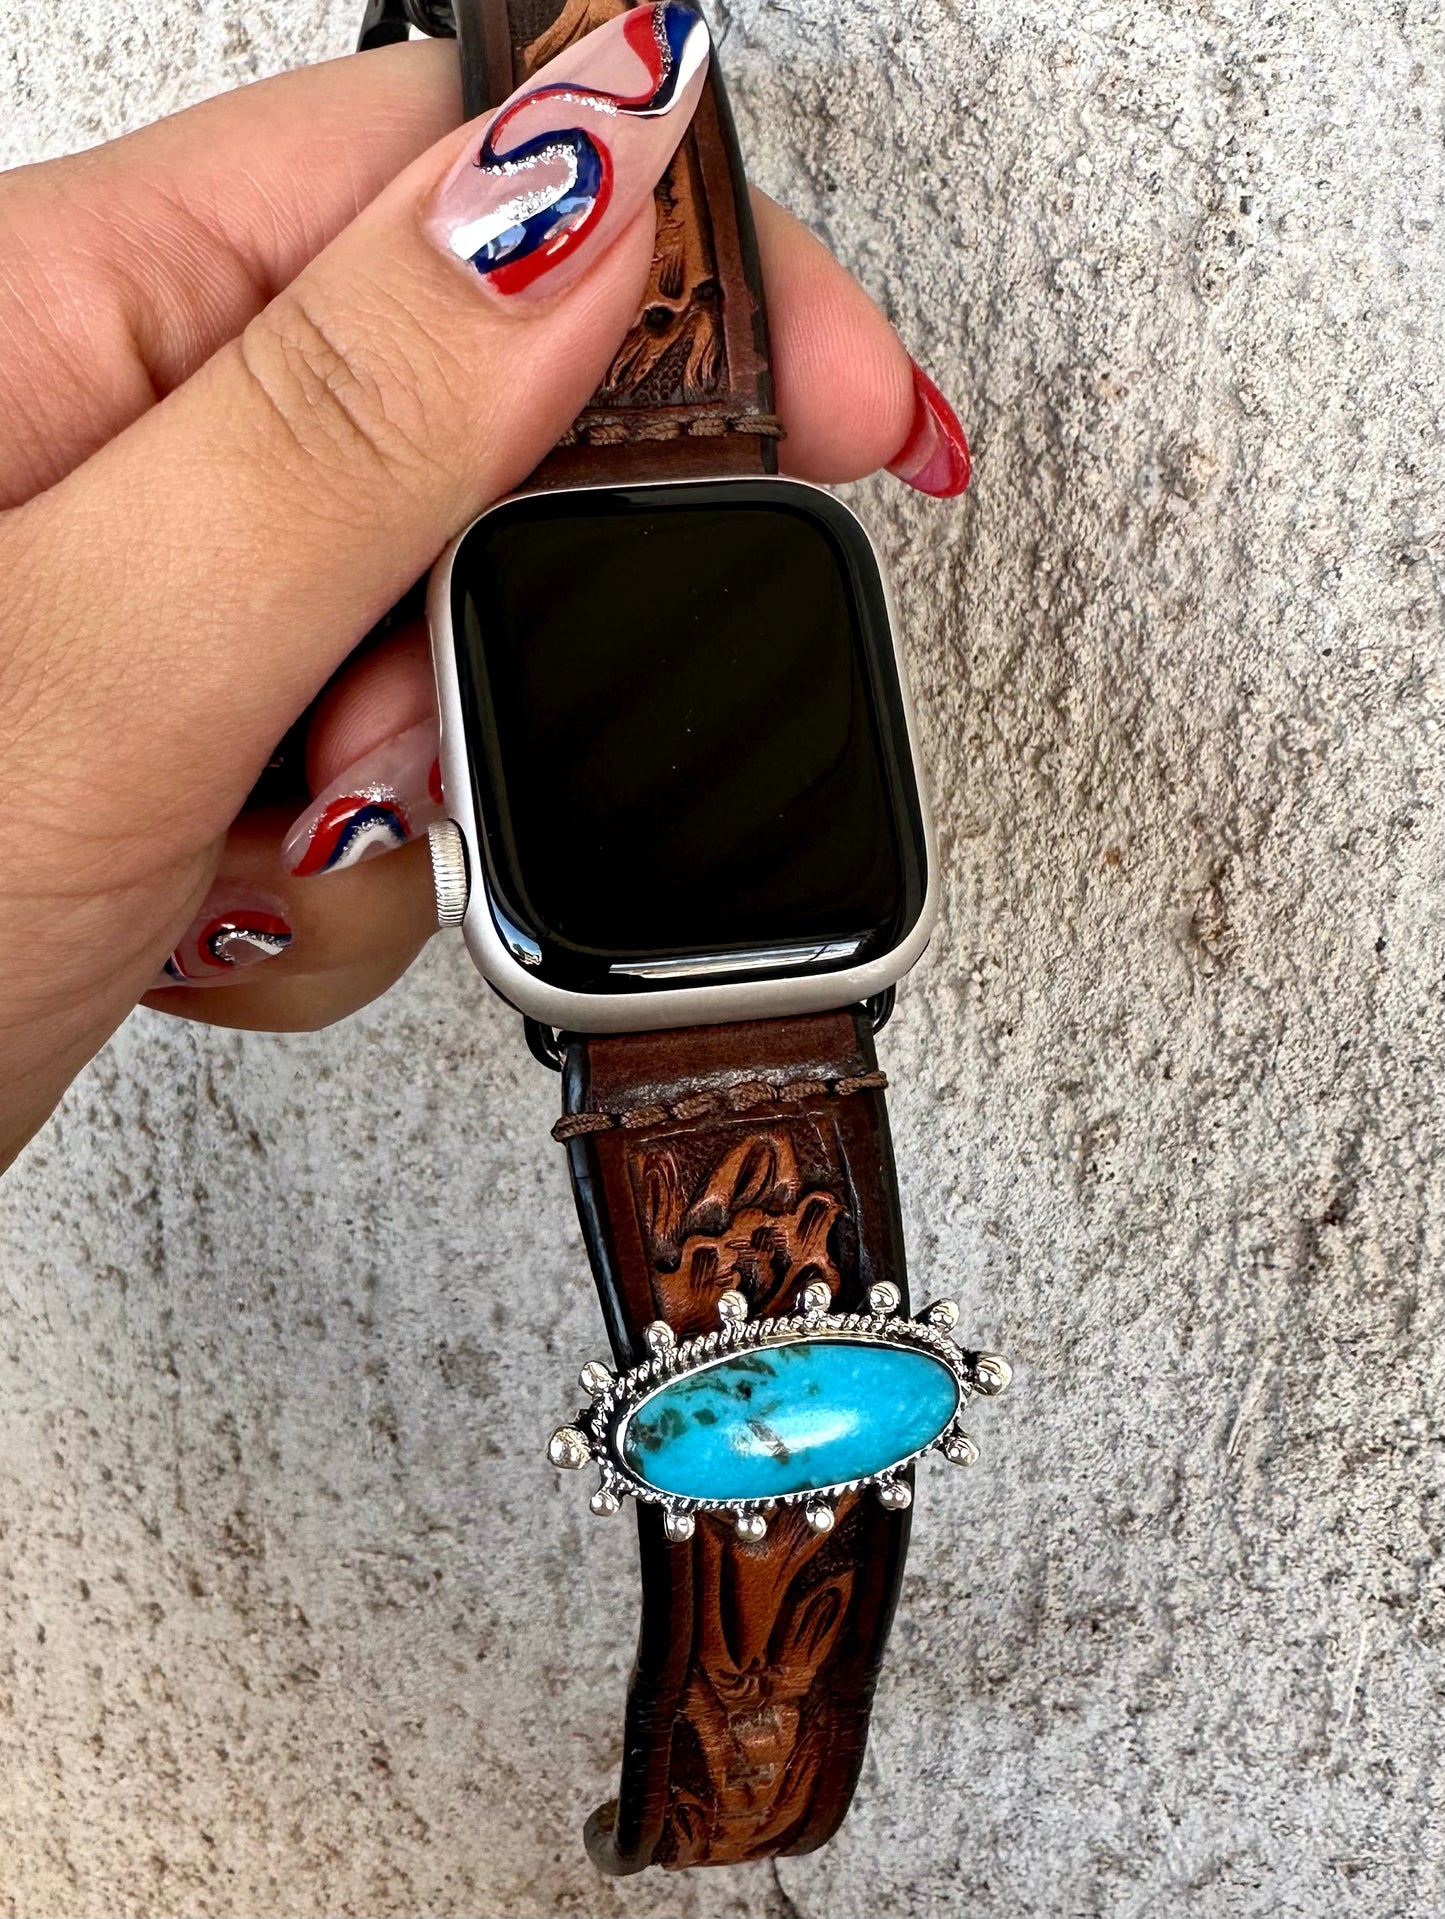 Showstopper Oval Apple Watch Accessory